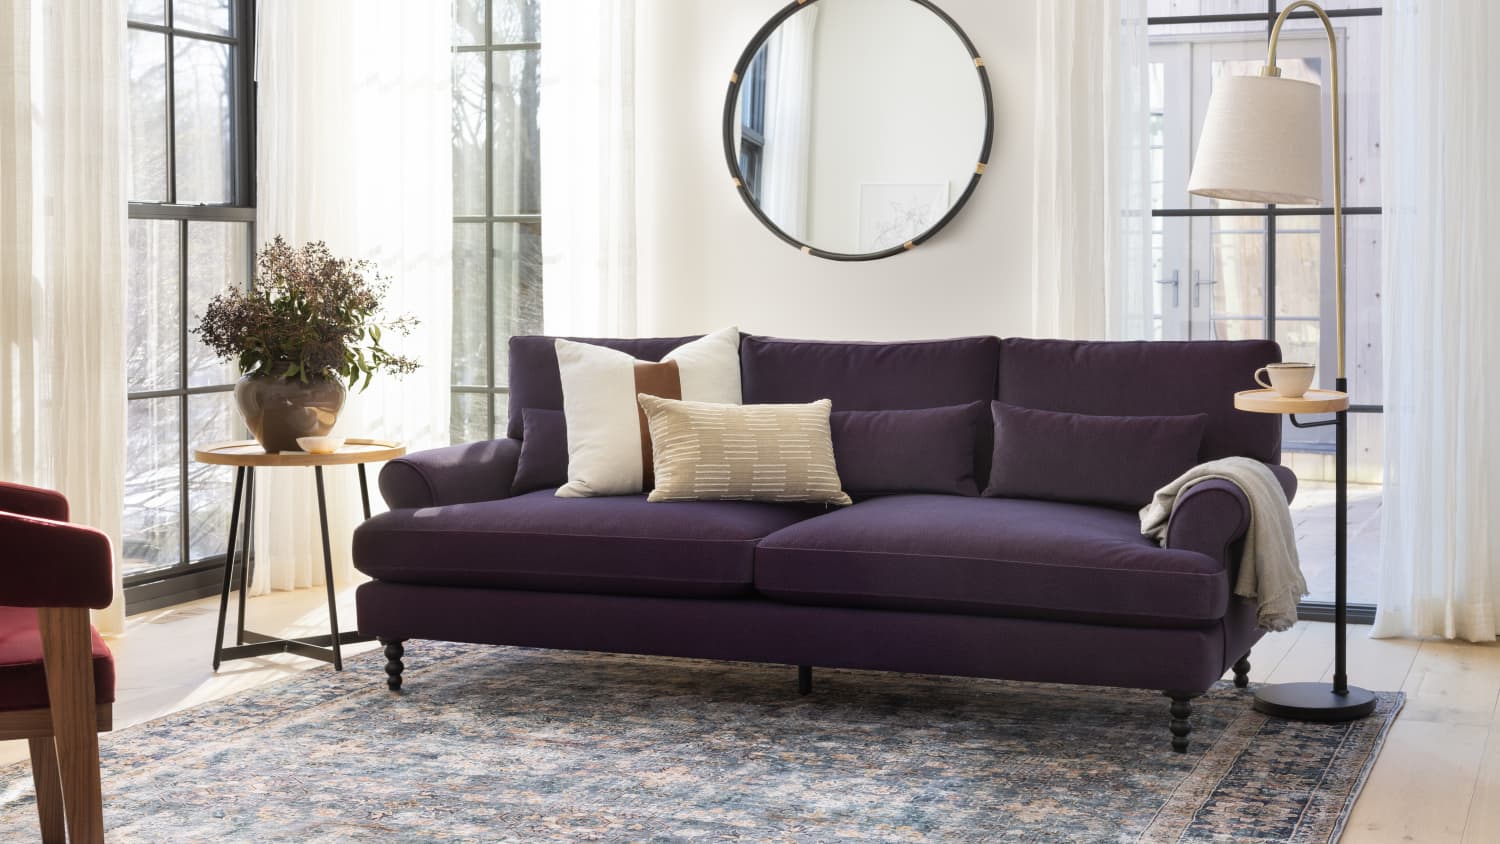 Interior Define - This monochromatic color scheme perfectly shows the  contoured arms and piping details that make our comfy cozy Maxwell sofa a  one of a kind. 📸: @common.living #interiordefine #myinteriordefine  #showemyourstyled #